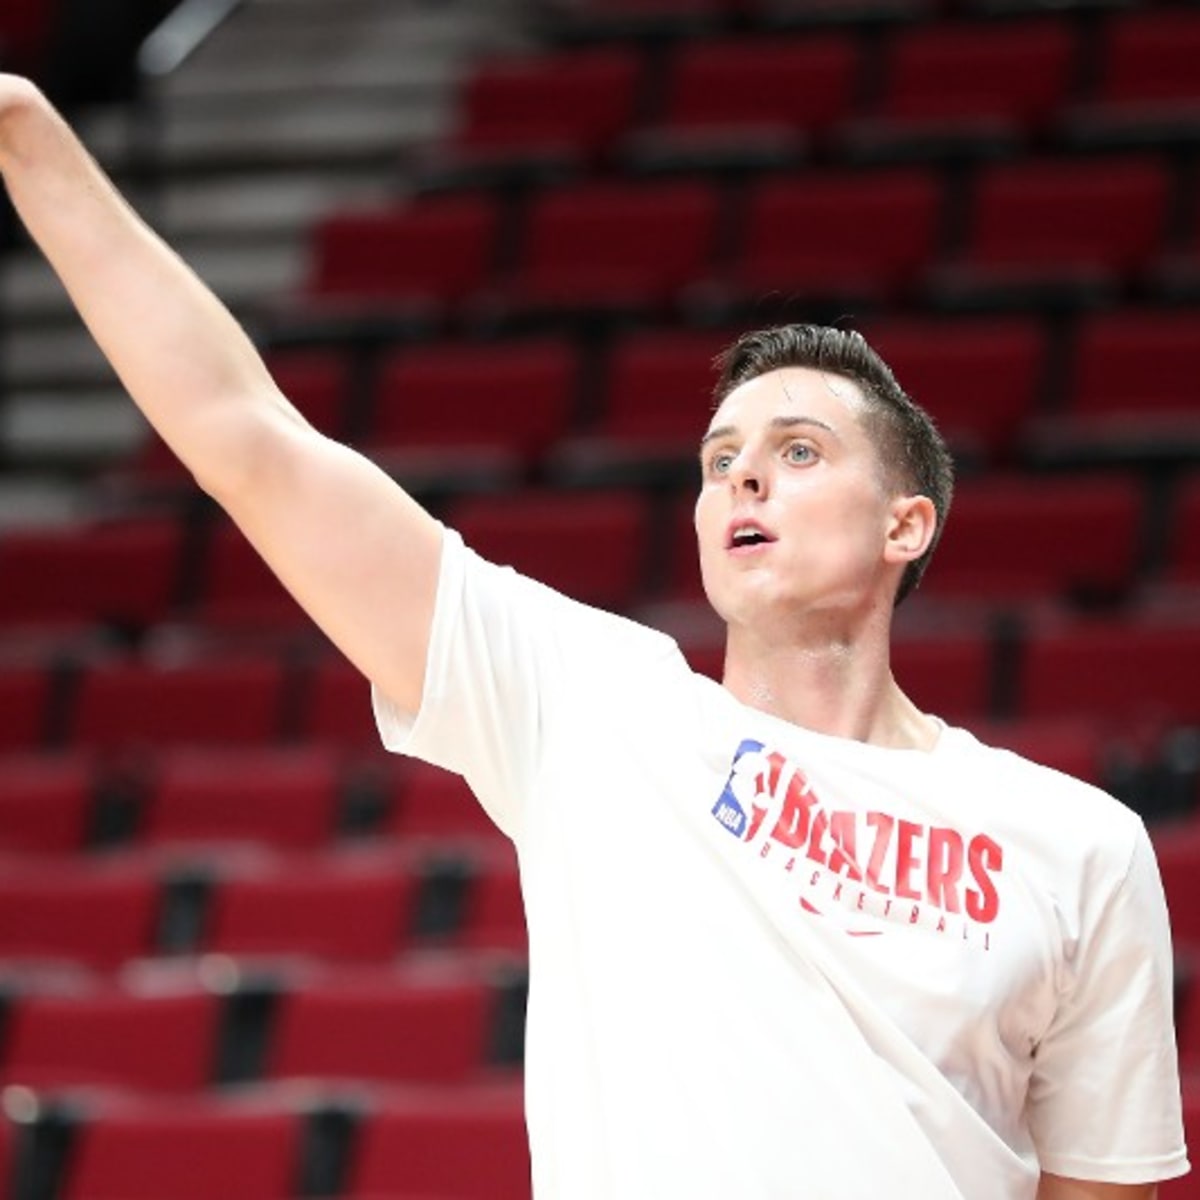 Free agent Zach Collins and his long road back: 'It's going to be